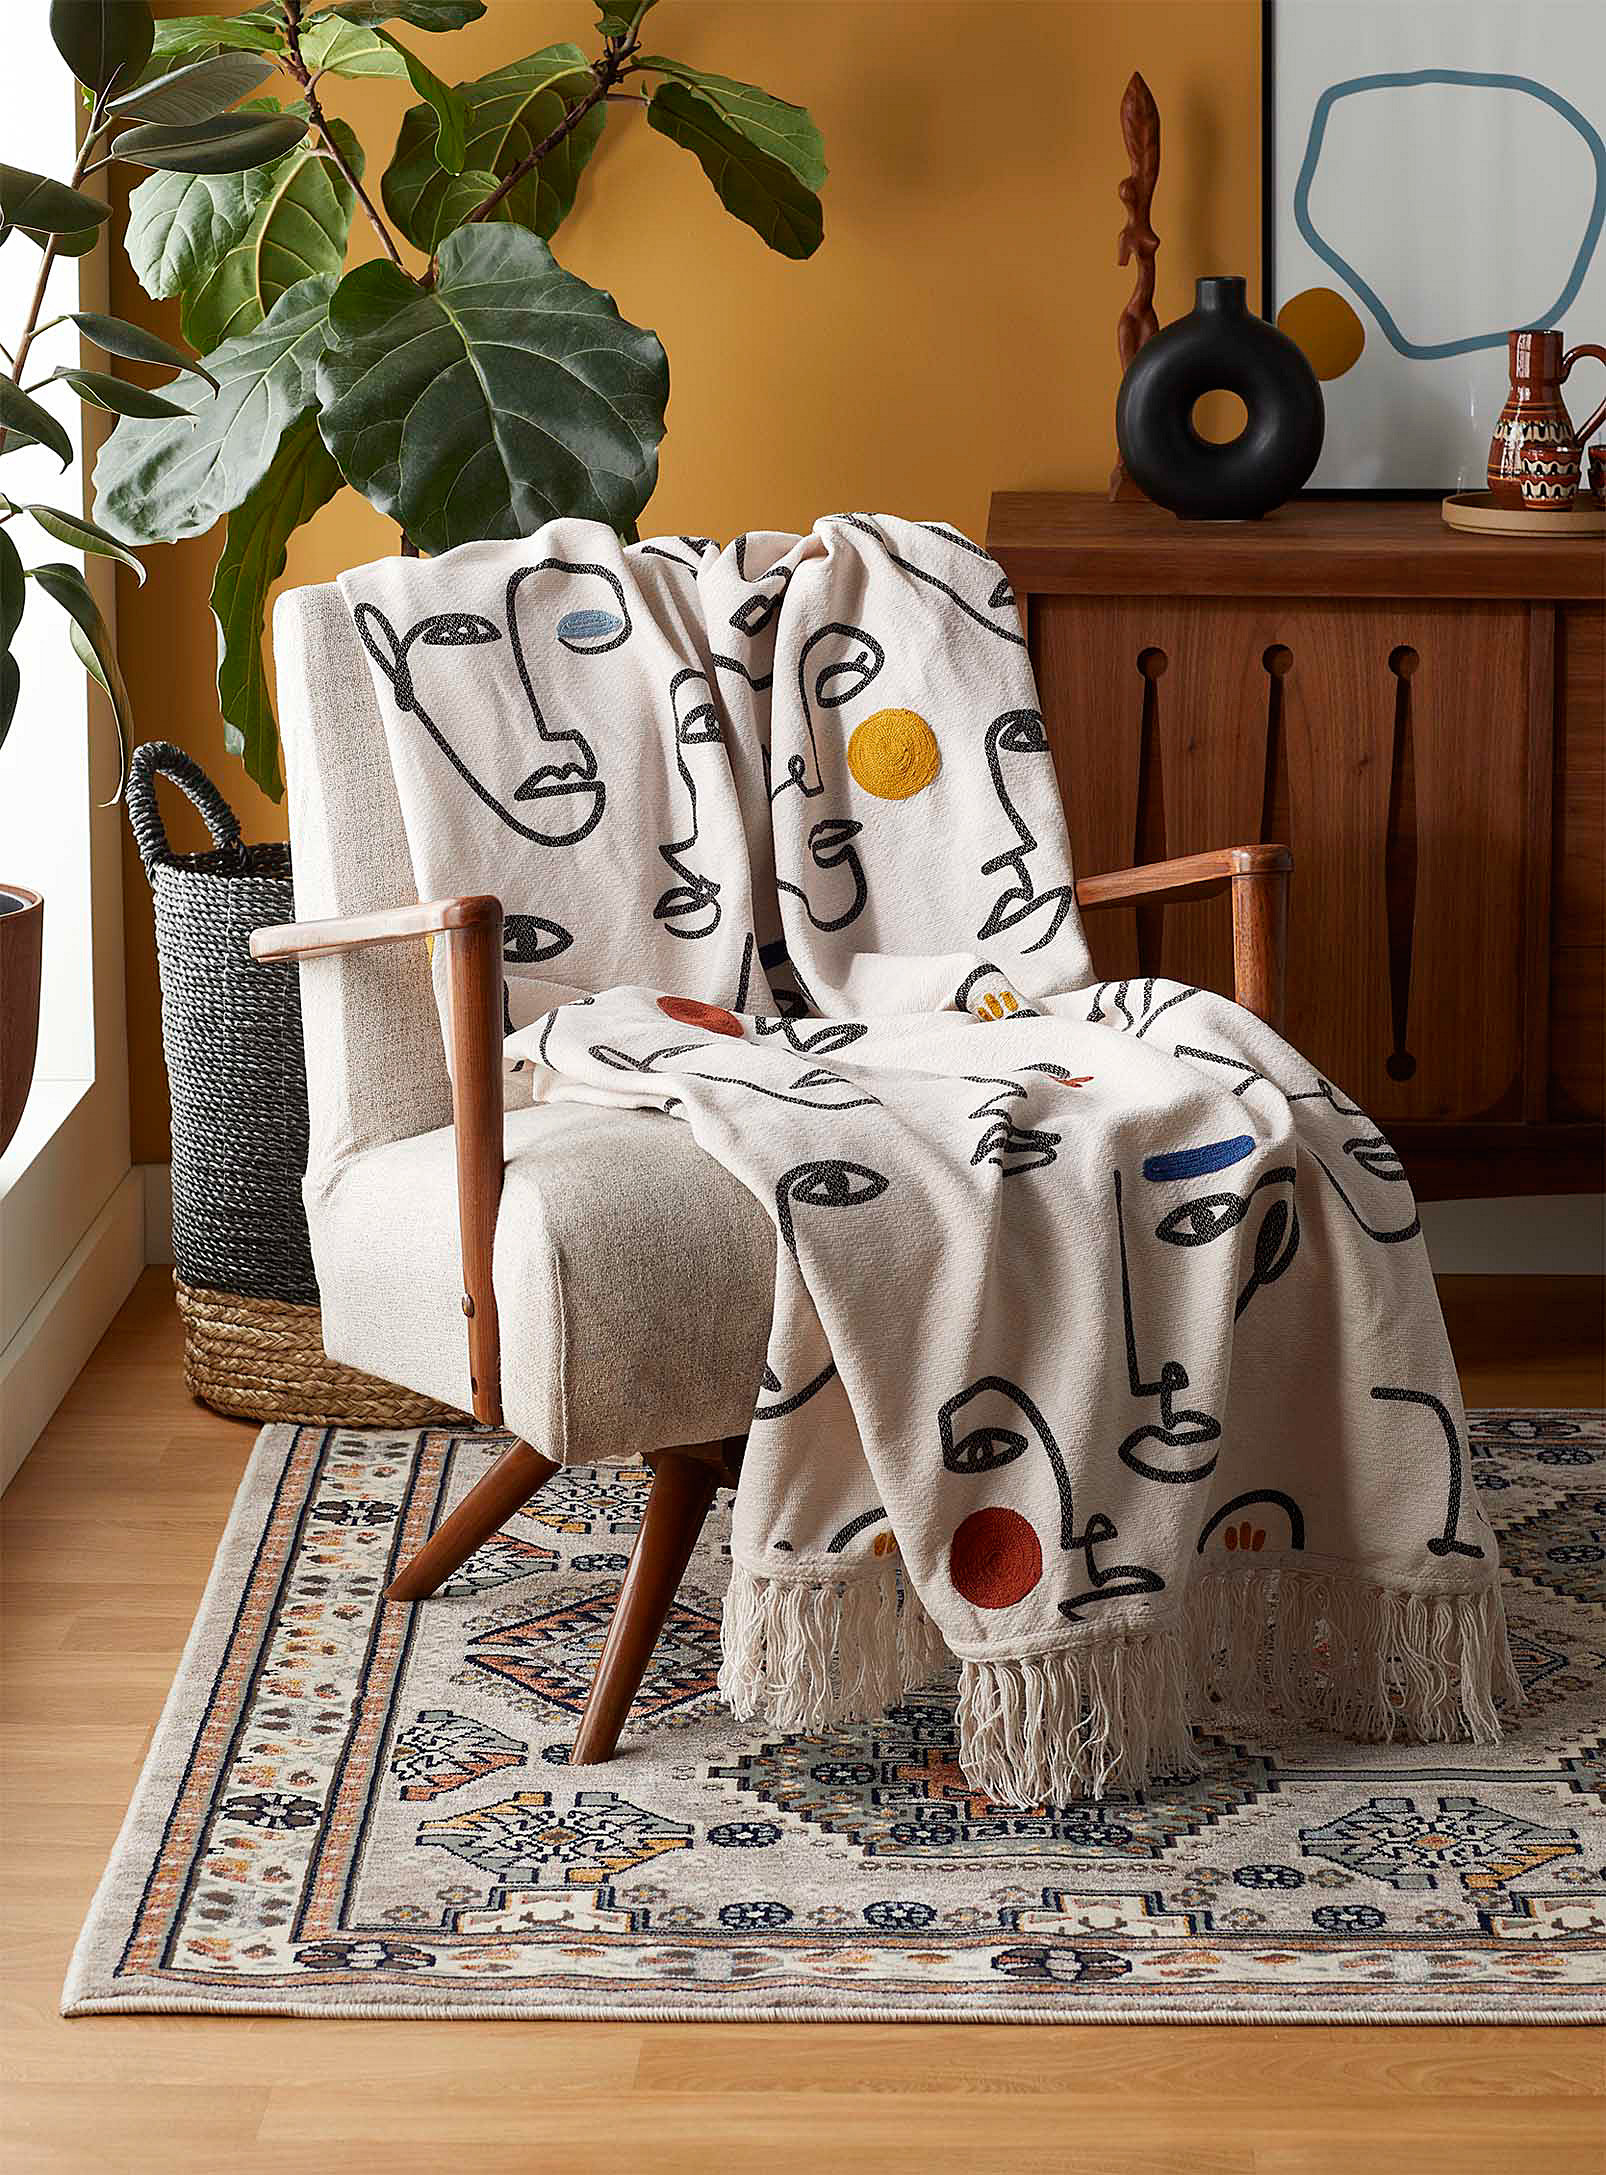 A soft throw blanket is draped over a chair